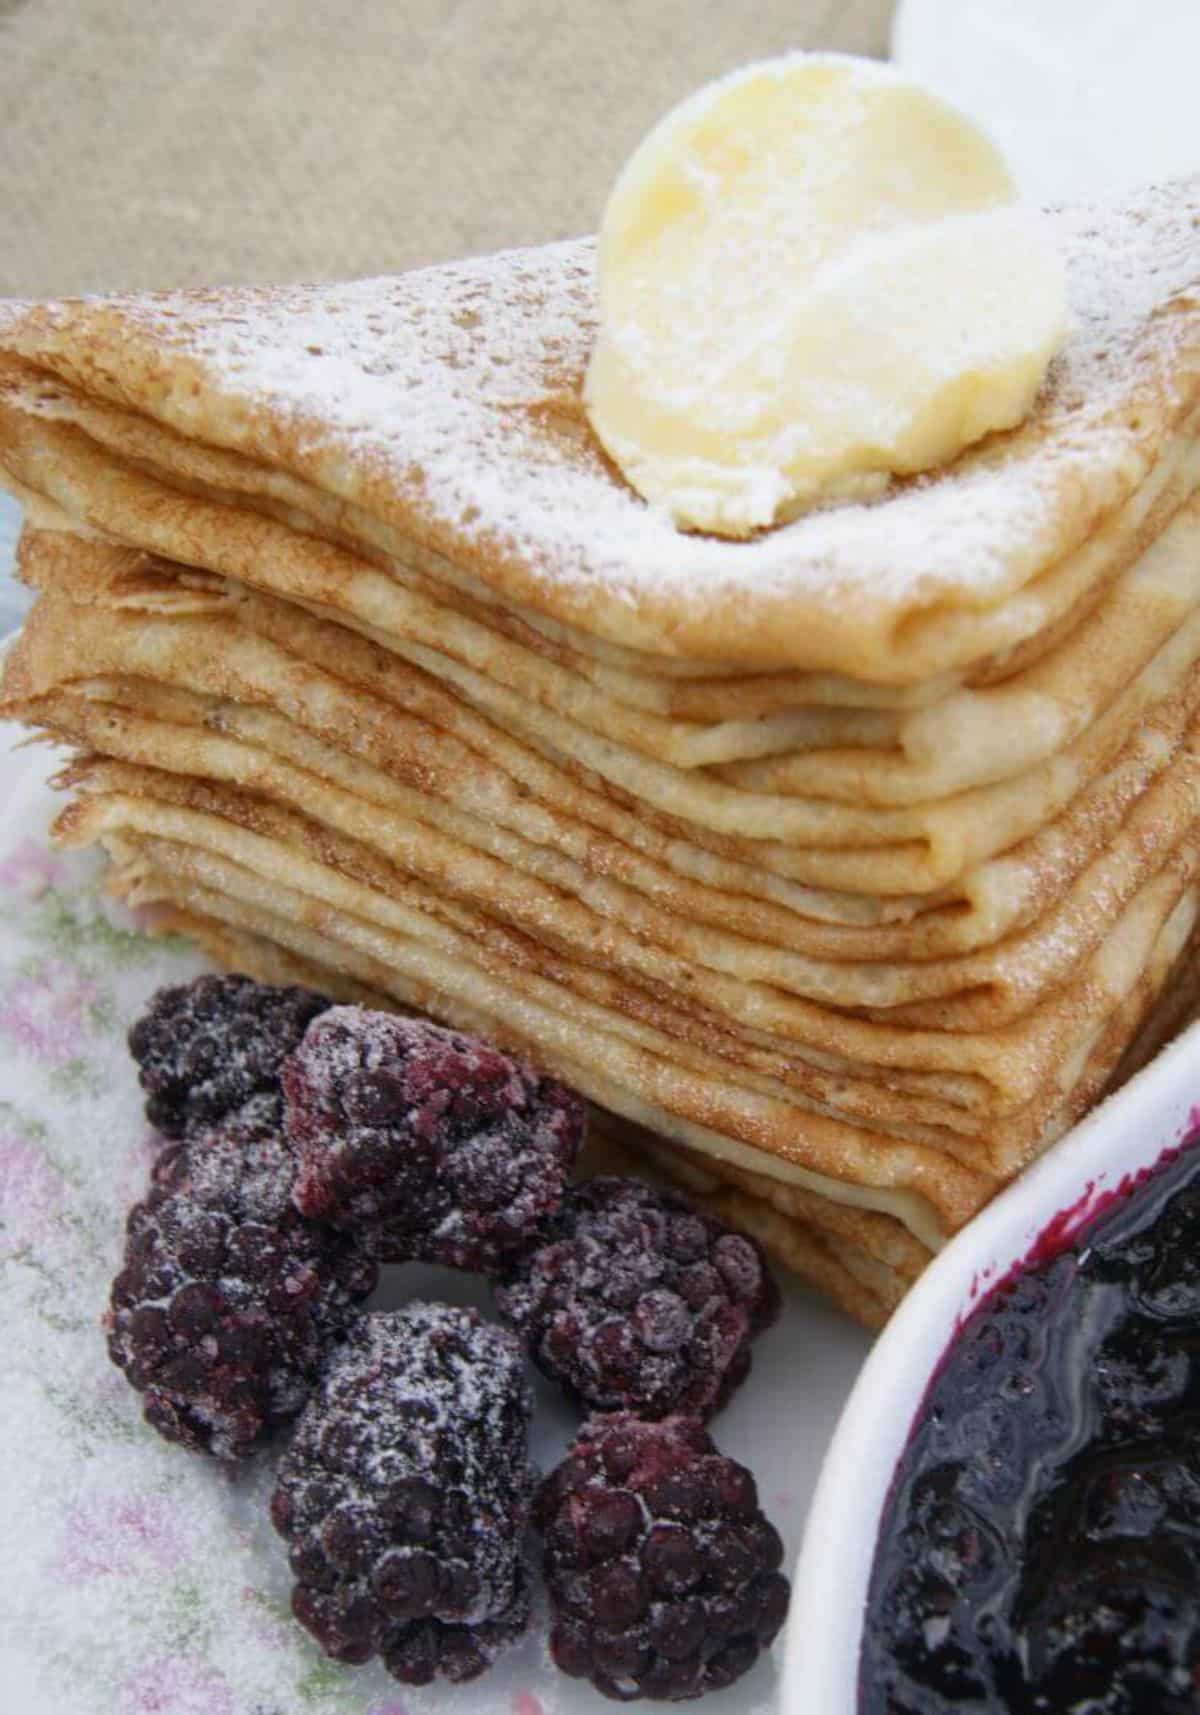 A pile of delicious Gluten-Free Crepes with raspberries on a table.